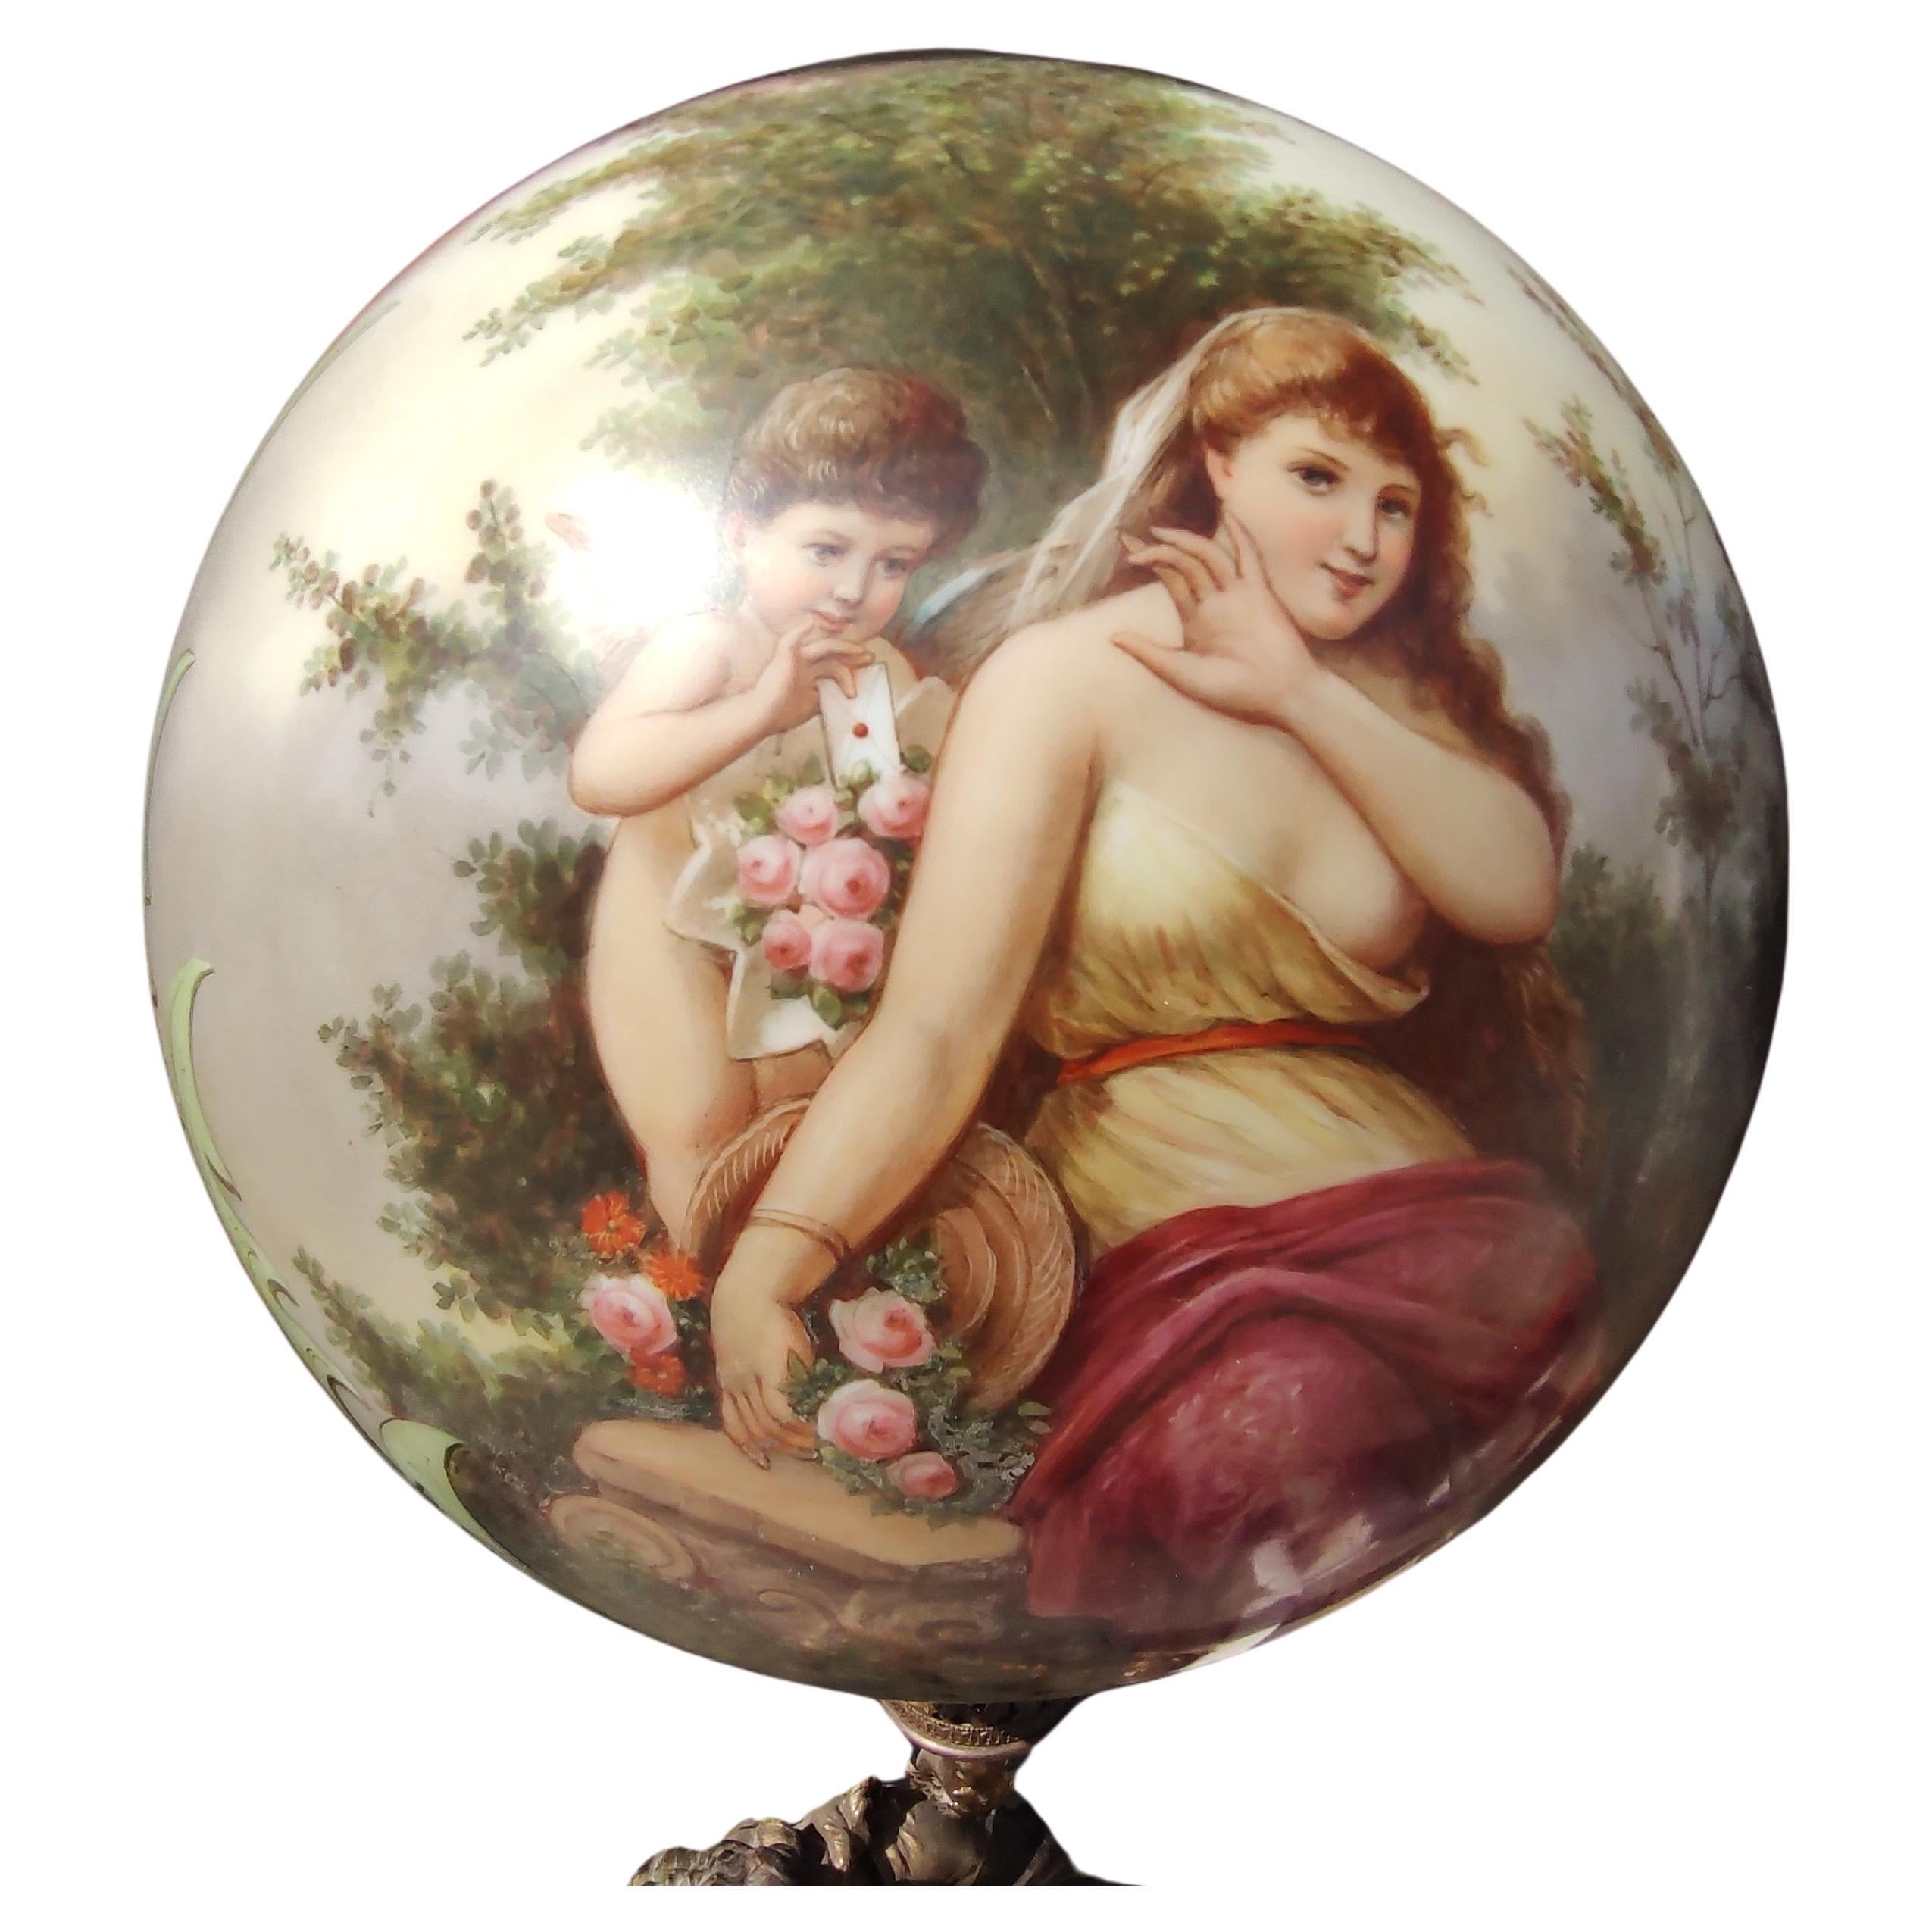 Spectacular Victorian Style hurricane gas lamp conversion to electric Gone With The Wind Table Lamp. Large, 11in hand painted globe by a member of the Ahne family. Globe depicts a maiden with a cherub in the background. In excellent condition. Lamp